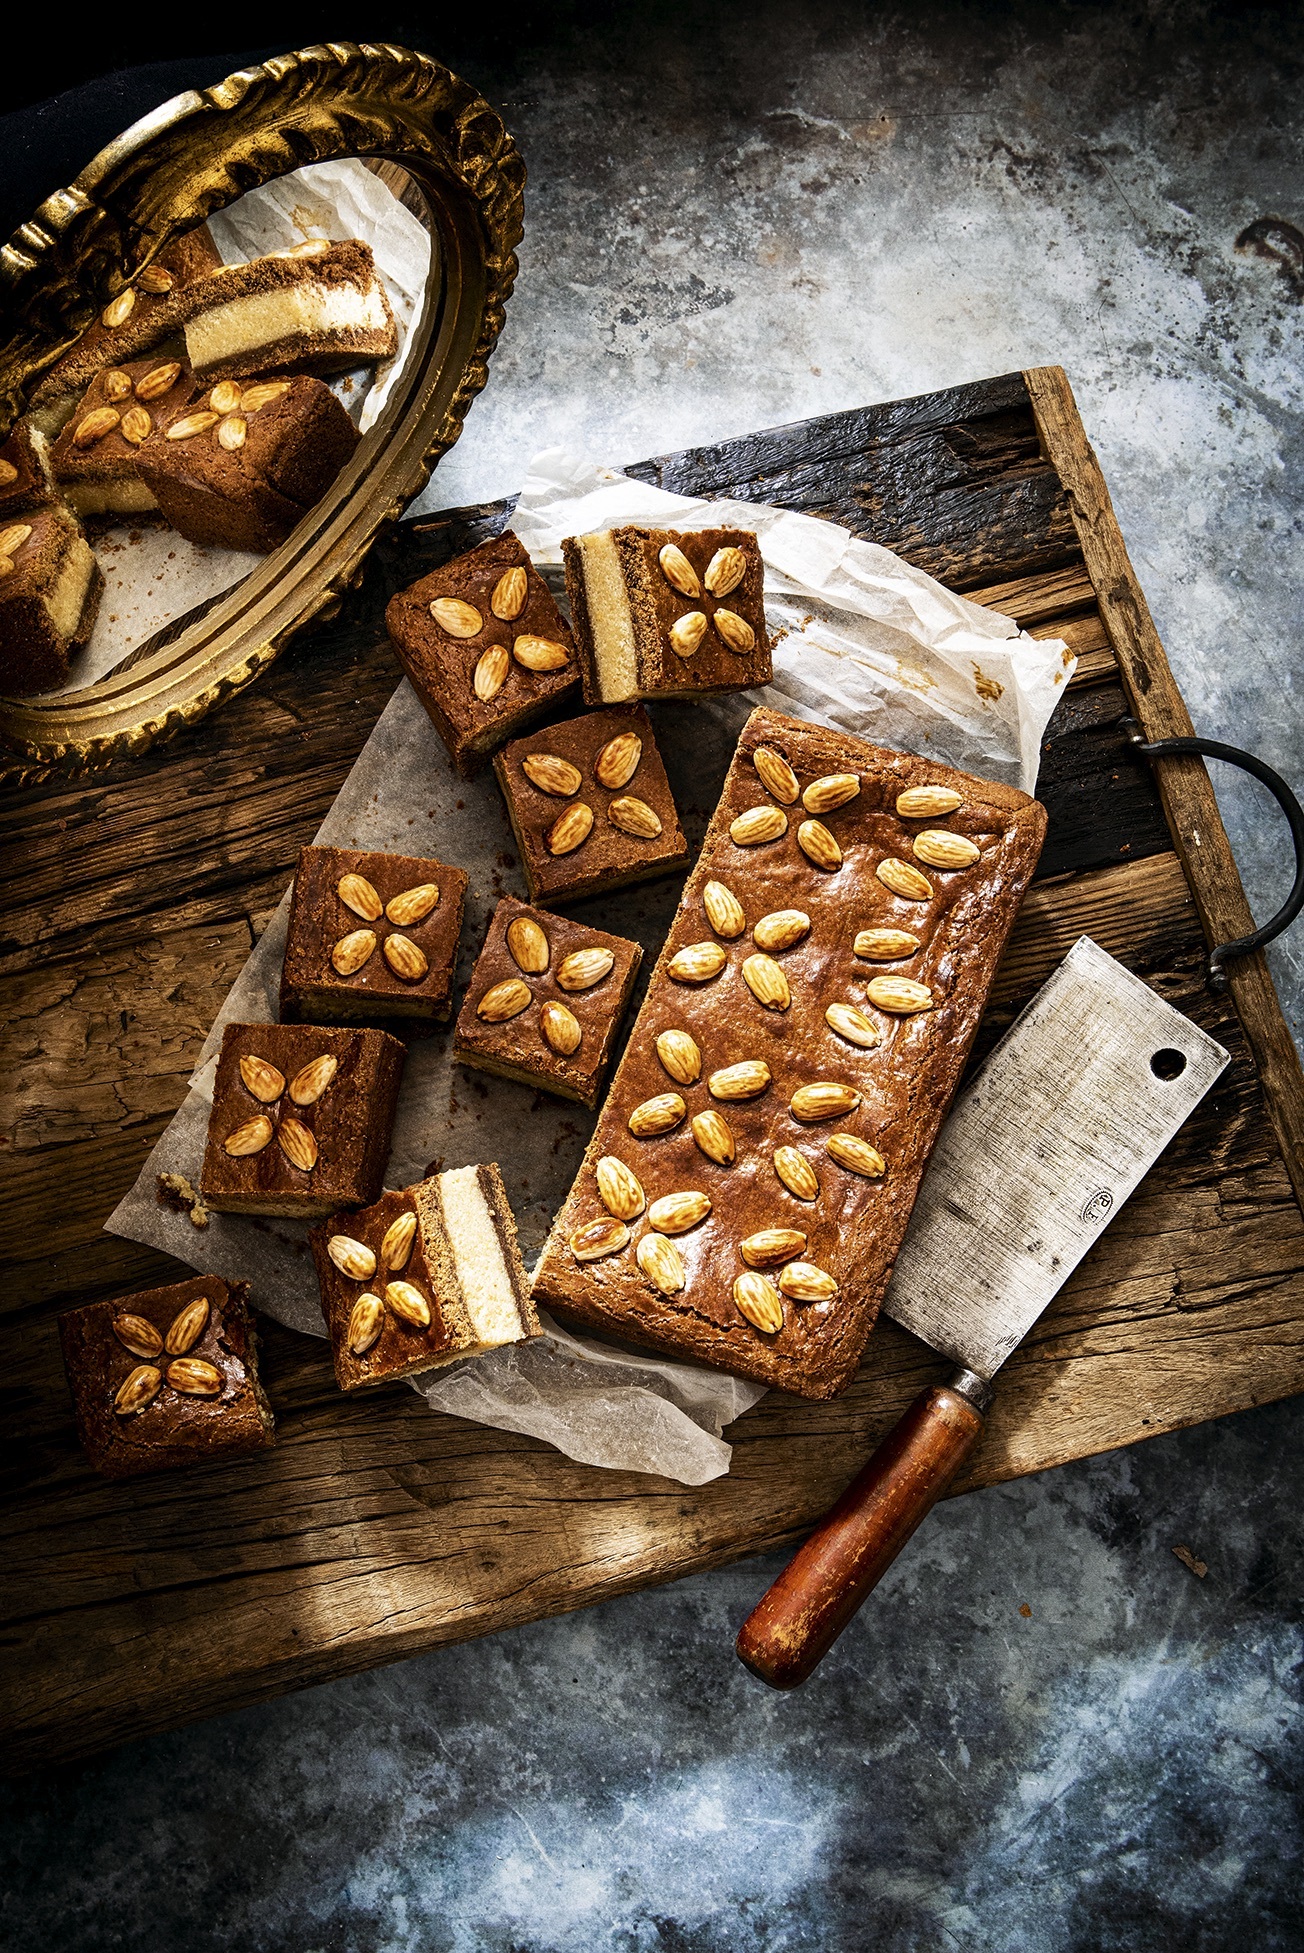 Speculaas stuffed with almond